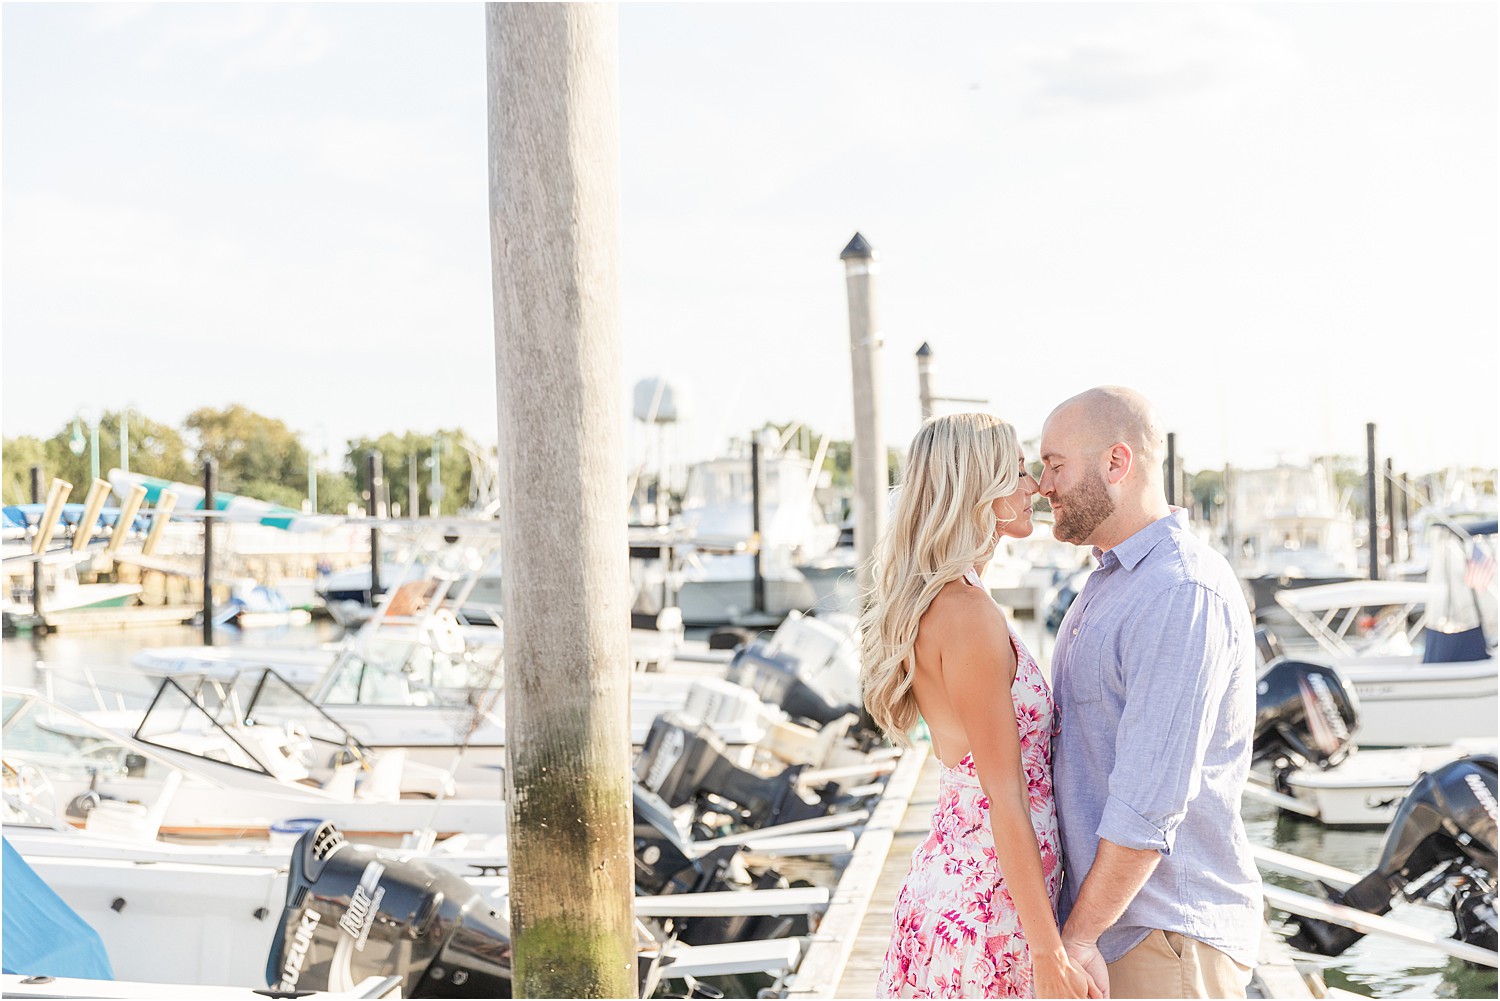 Engaged couple kiss at marina with boats in background